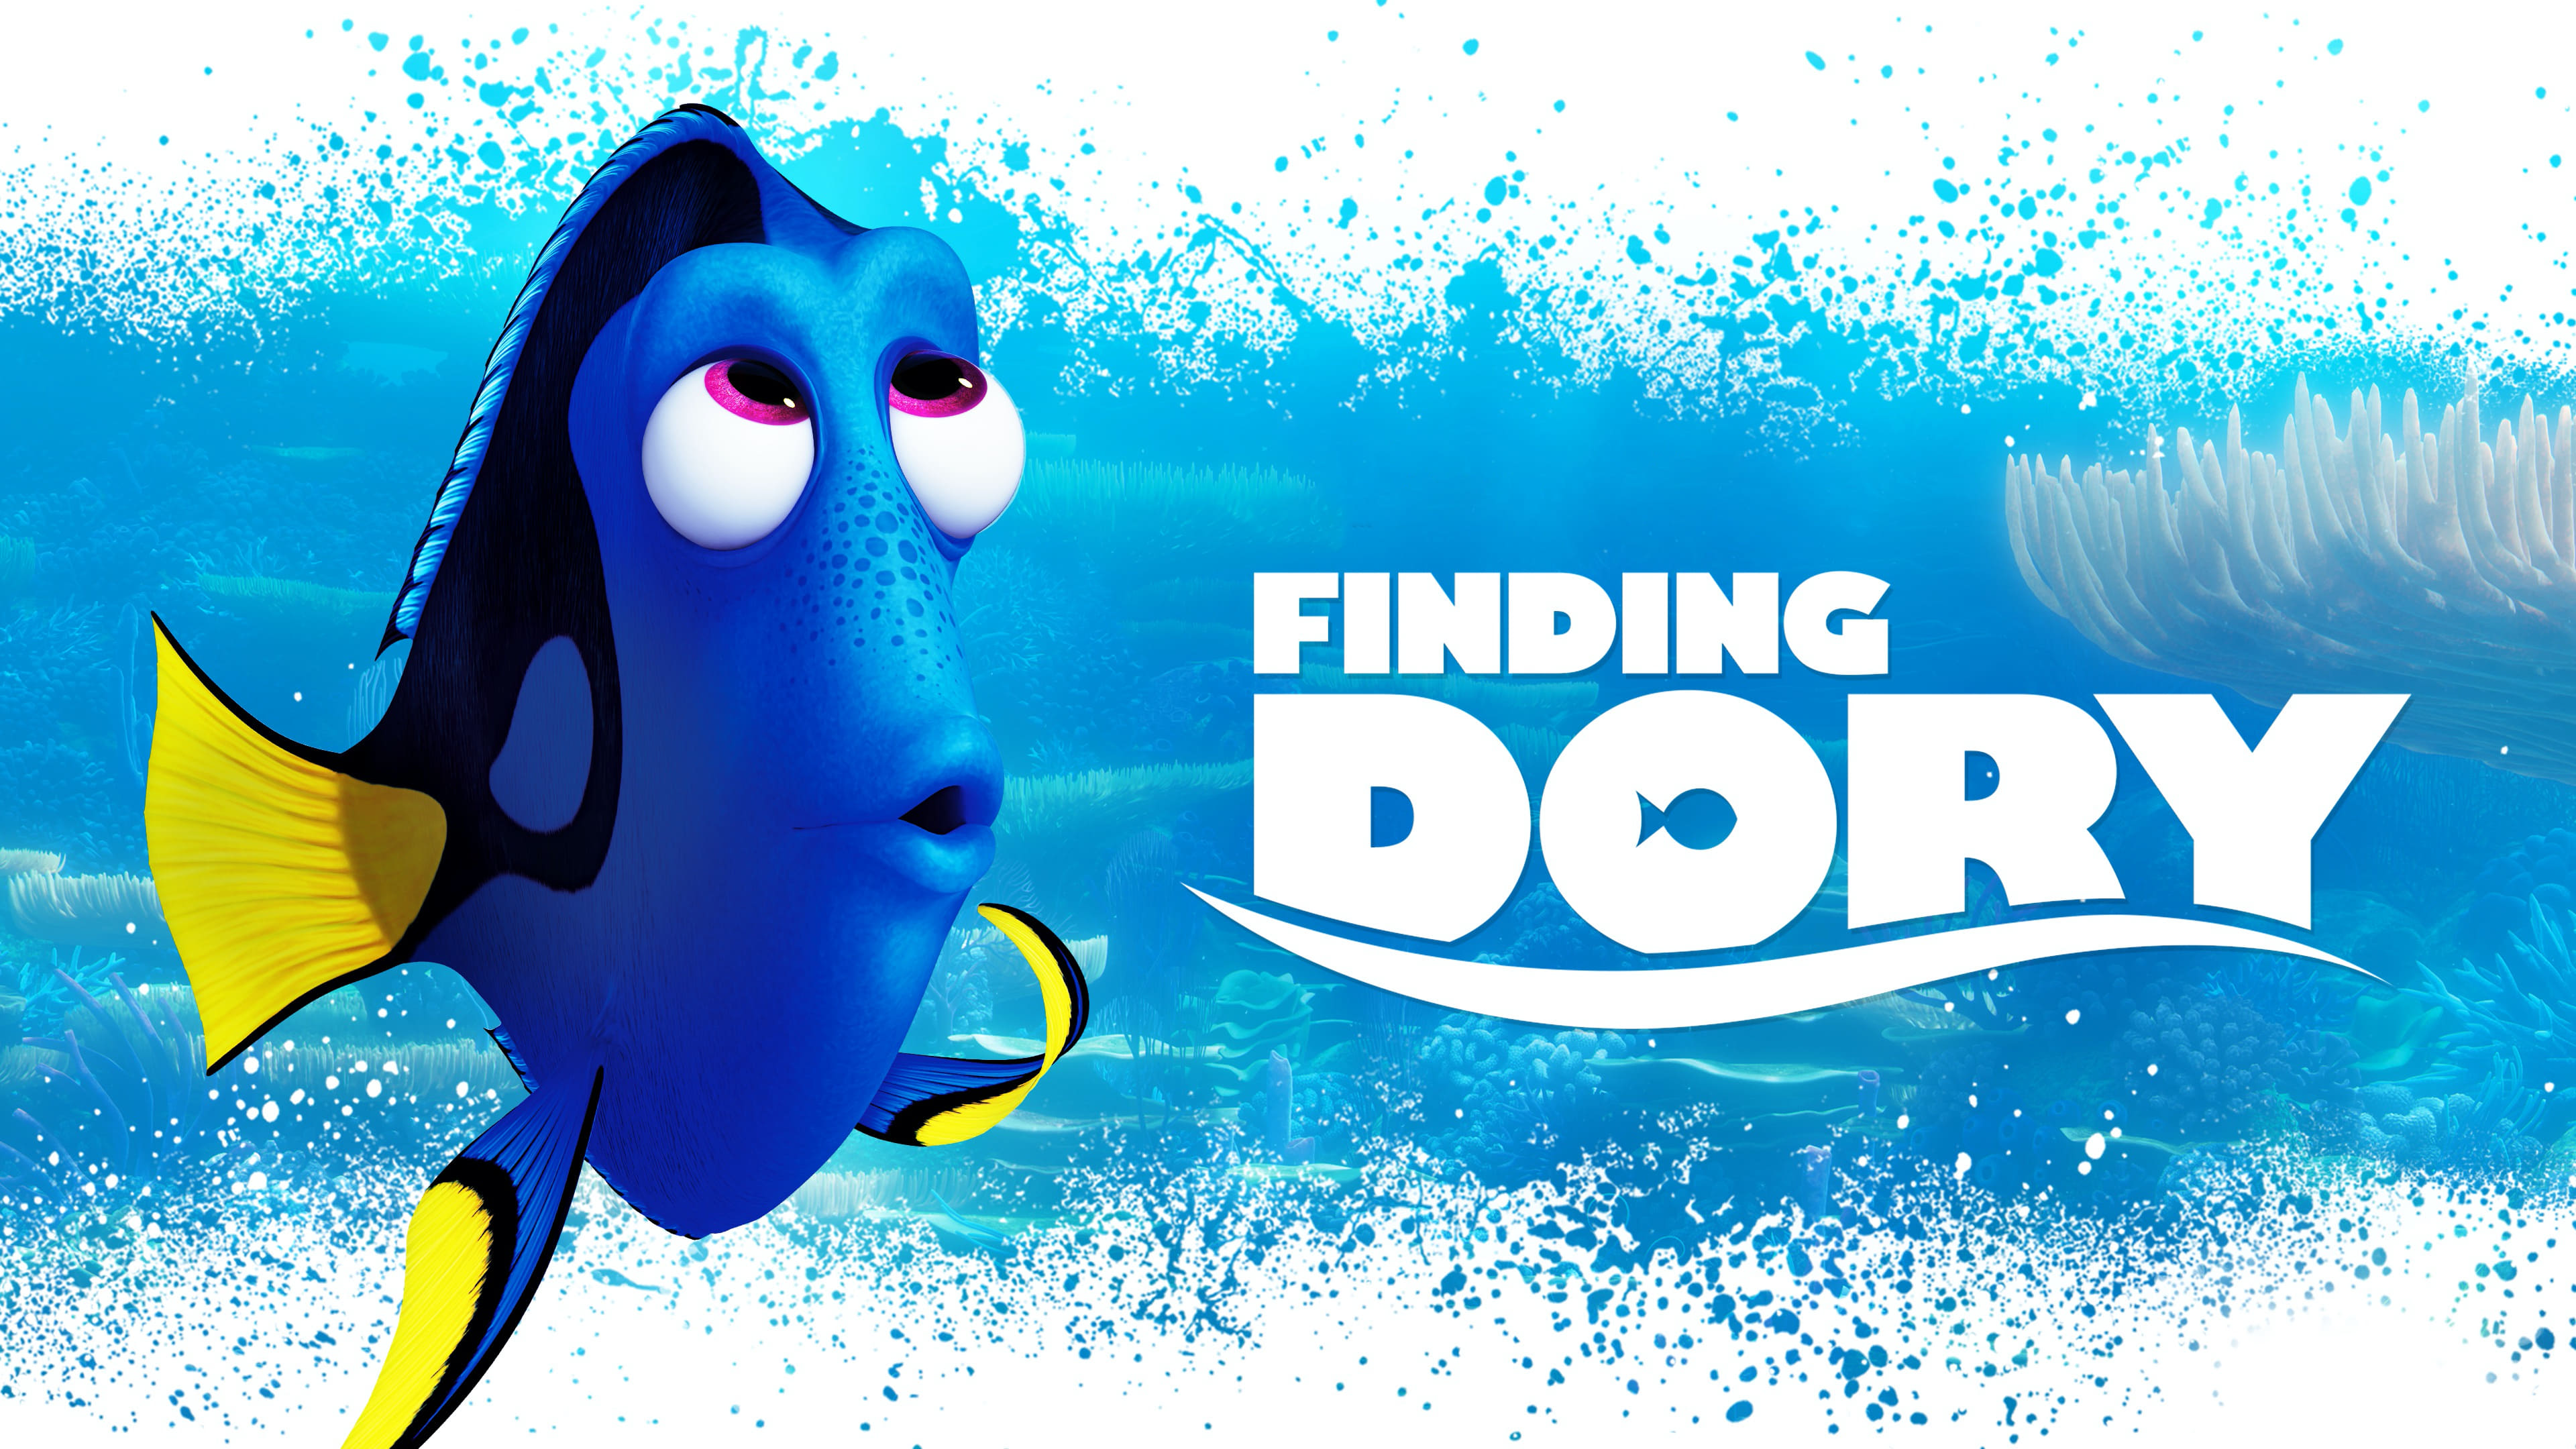 thesis statement about finding dory